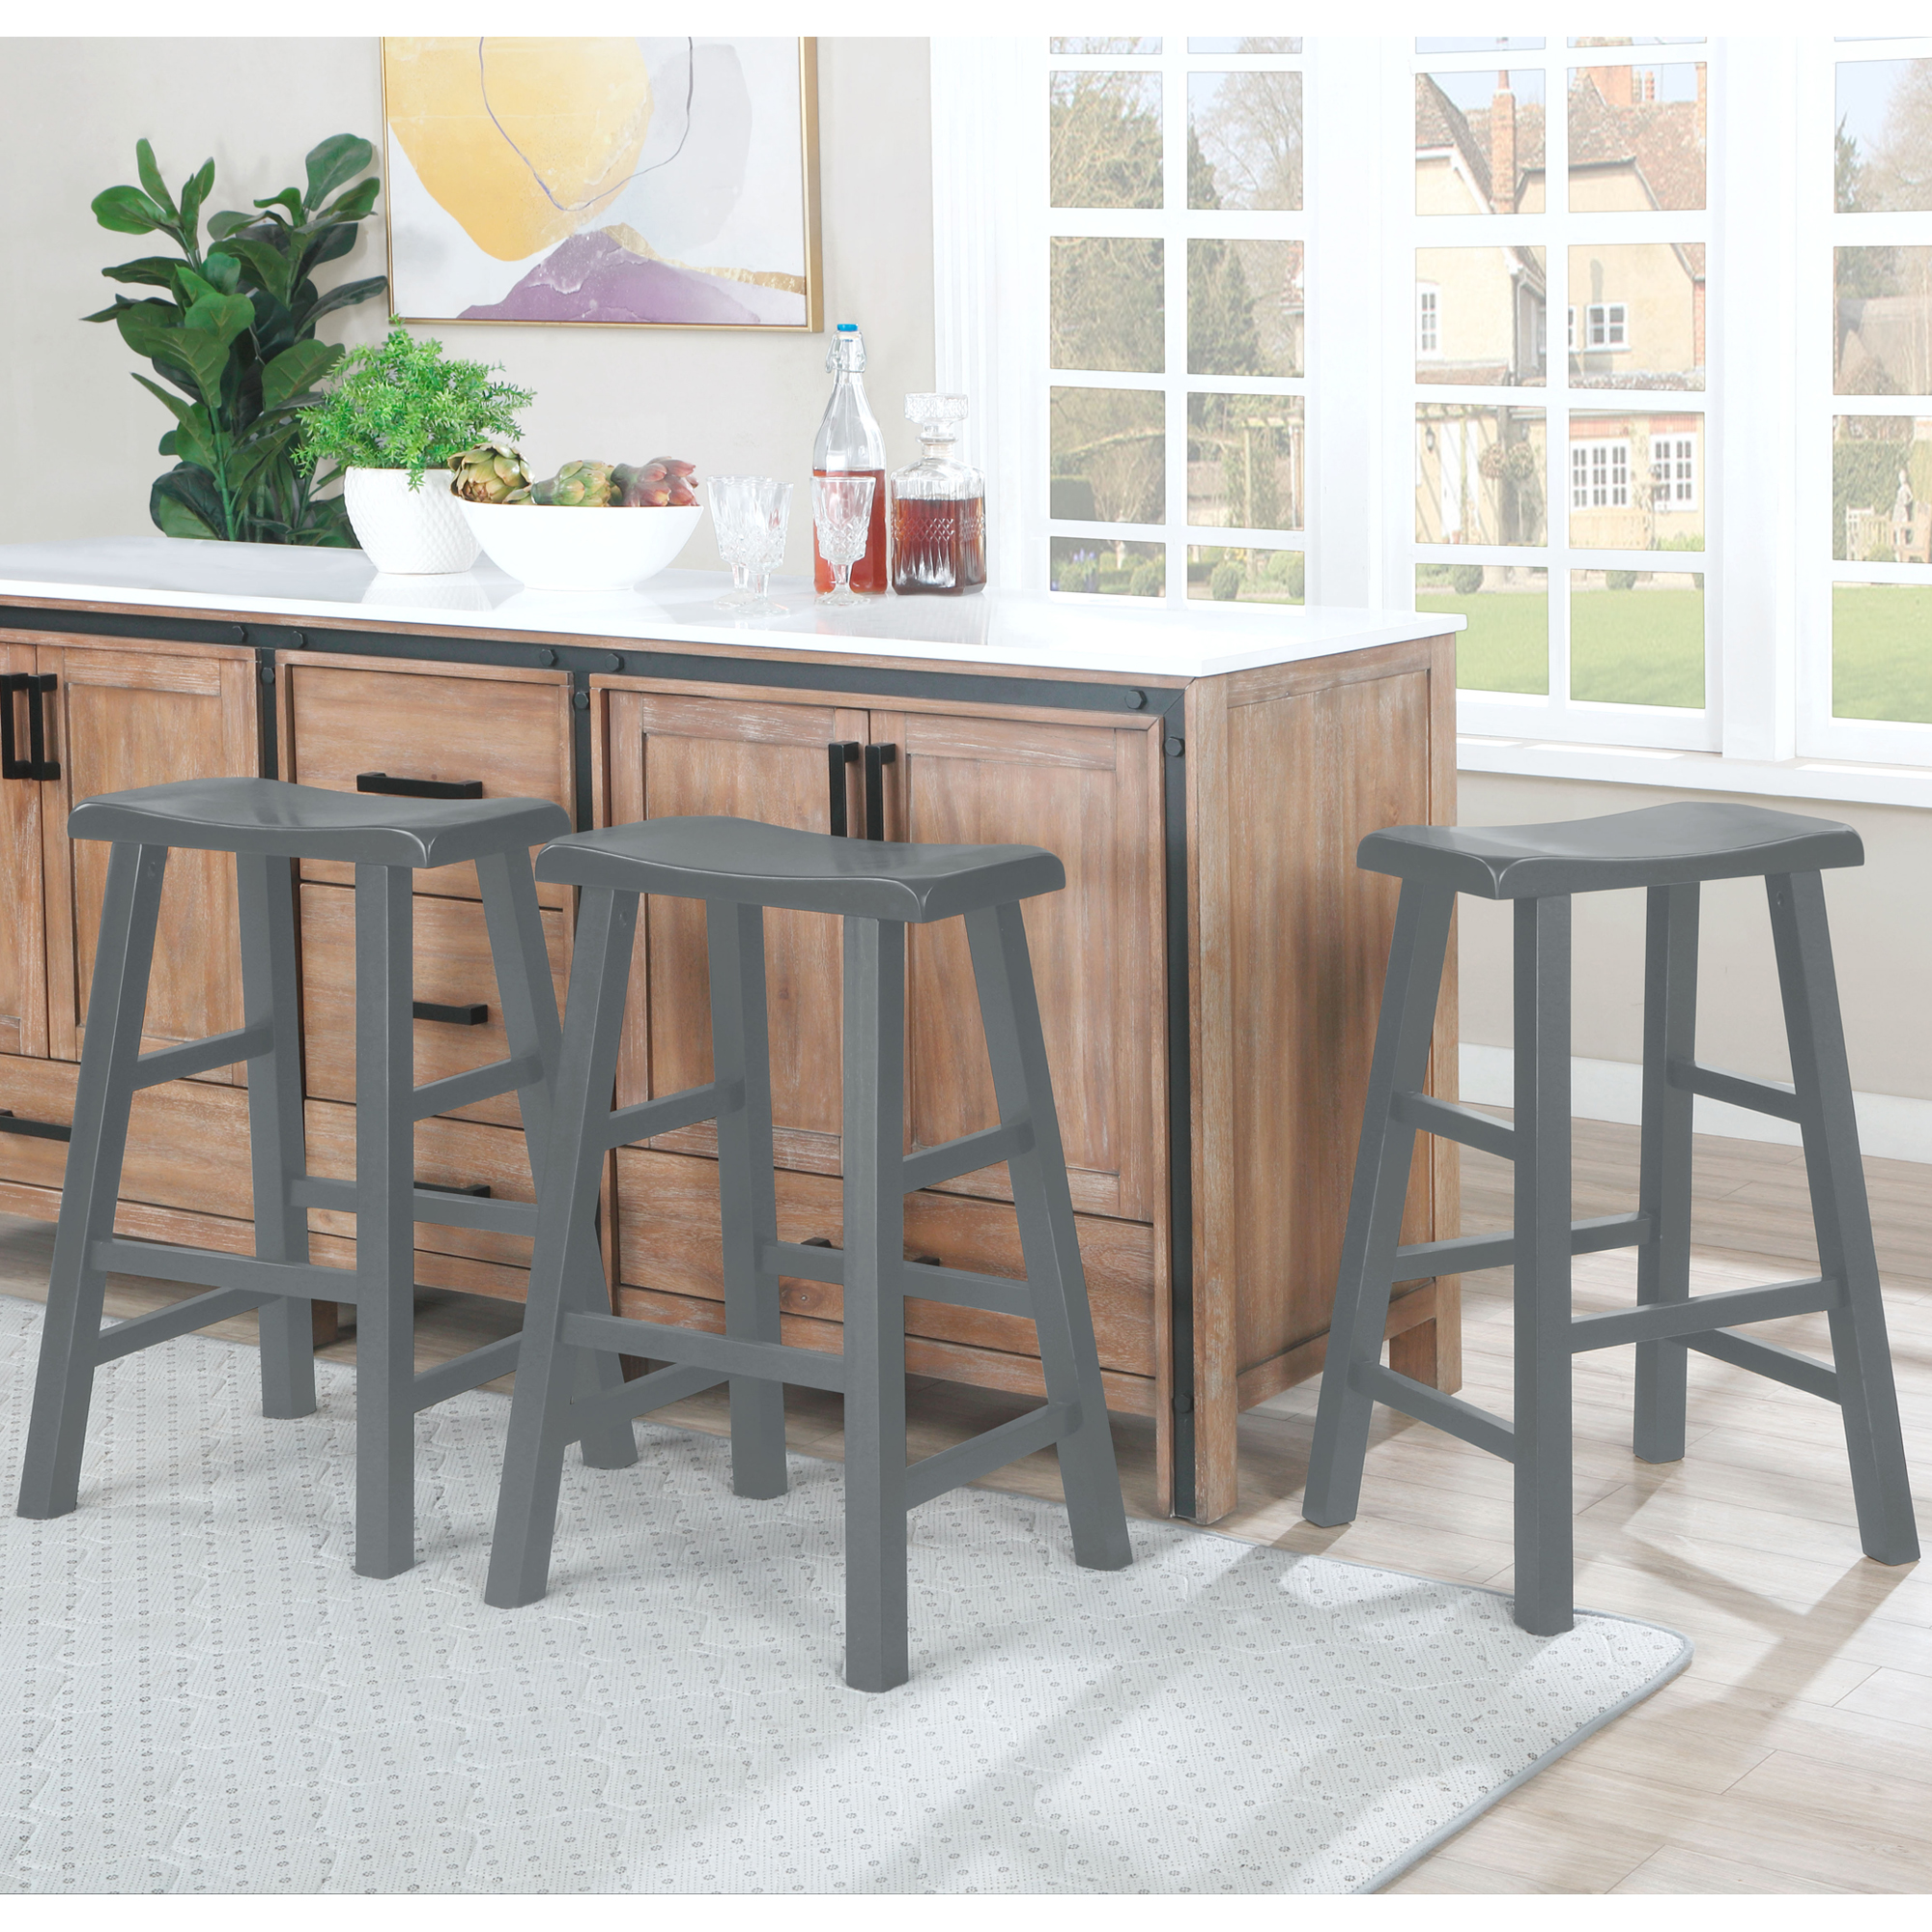 eHemco Heavy-Duty Solid Wood Saddle Seat Kitchen Counter Height Barstools, 29 Inches, Gray, Set of 3 - image 2 of 5